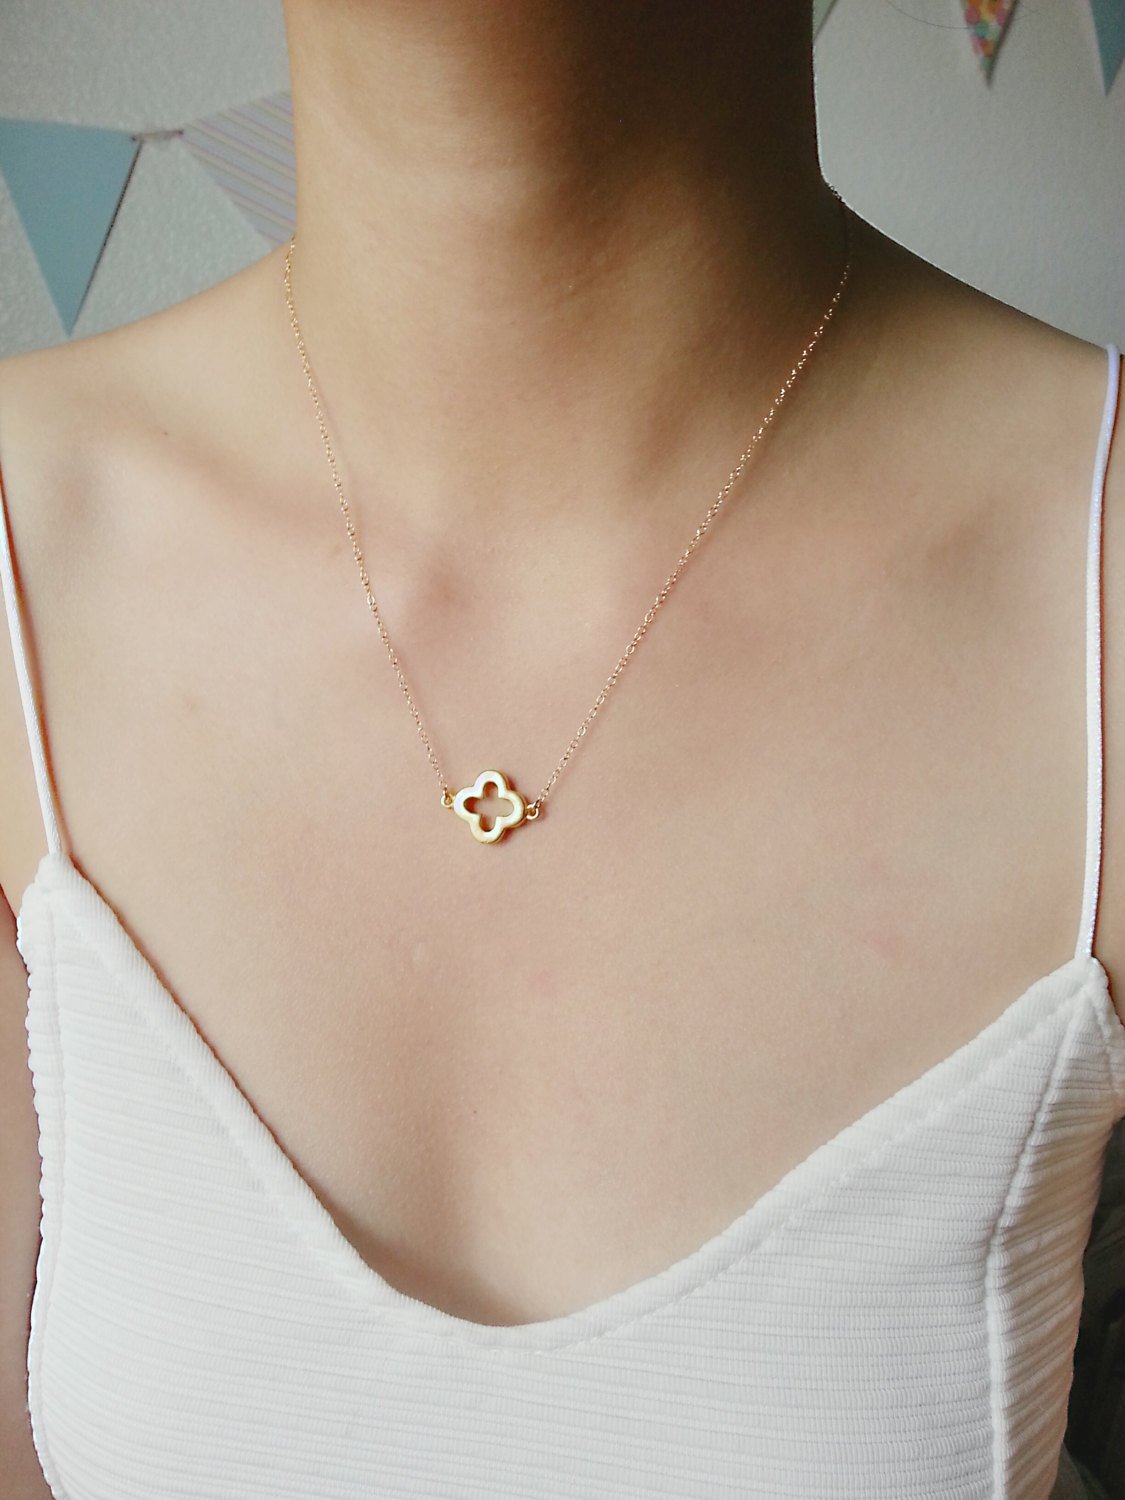 Gold Clover Necklace, Clover Charm, Gold Necklace, Gold Quatrefoil Necklace, Gold Layer Necklace, Flower Necklace, Dainty Necklace - HarperCrown